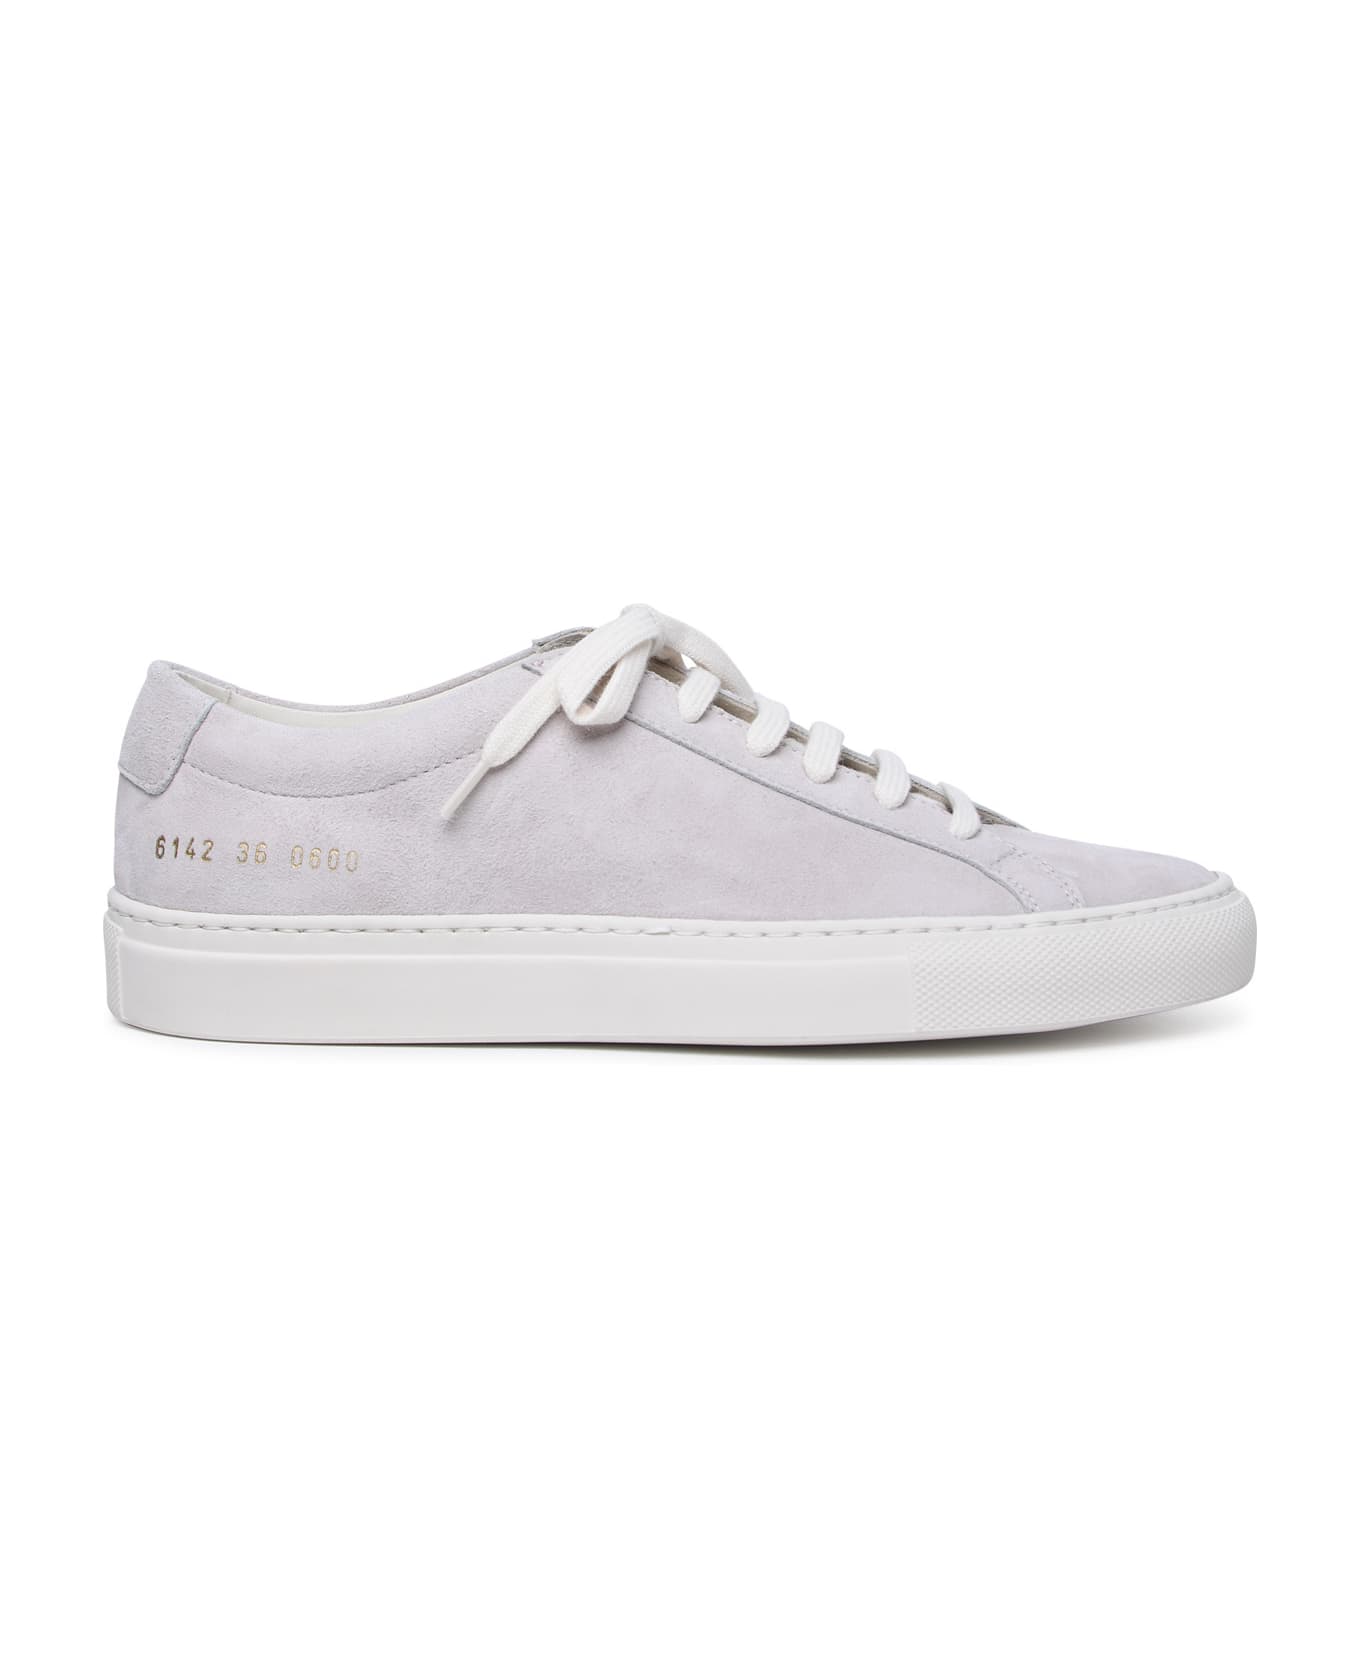 Common Projects Achilles Low Sneakers - Nude